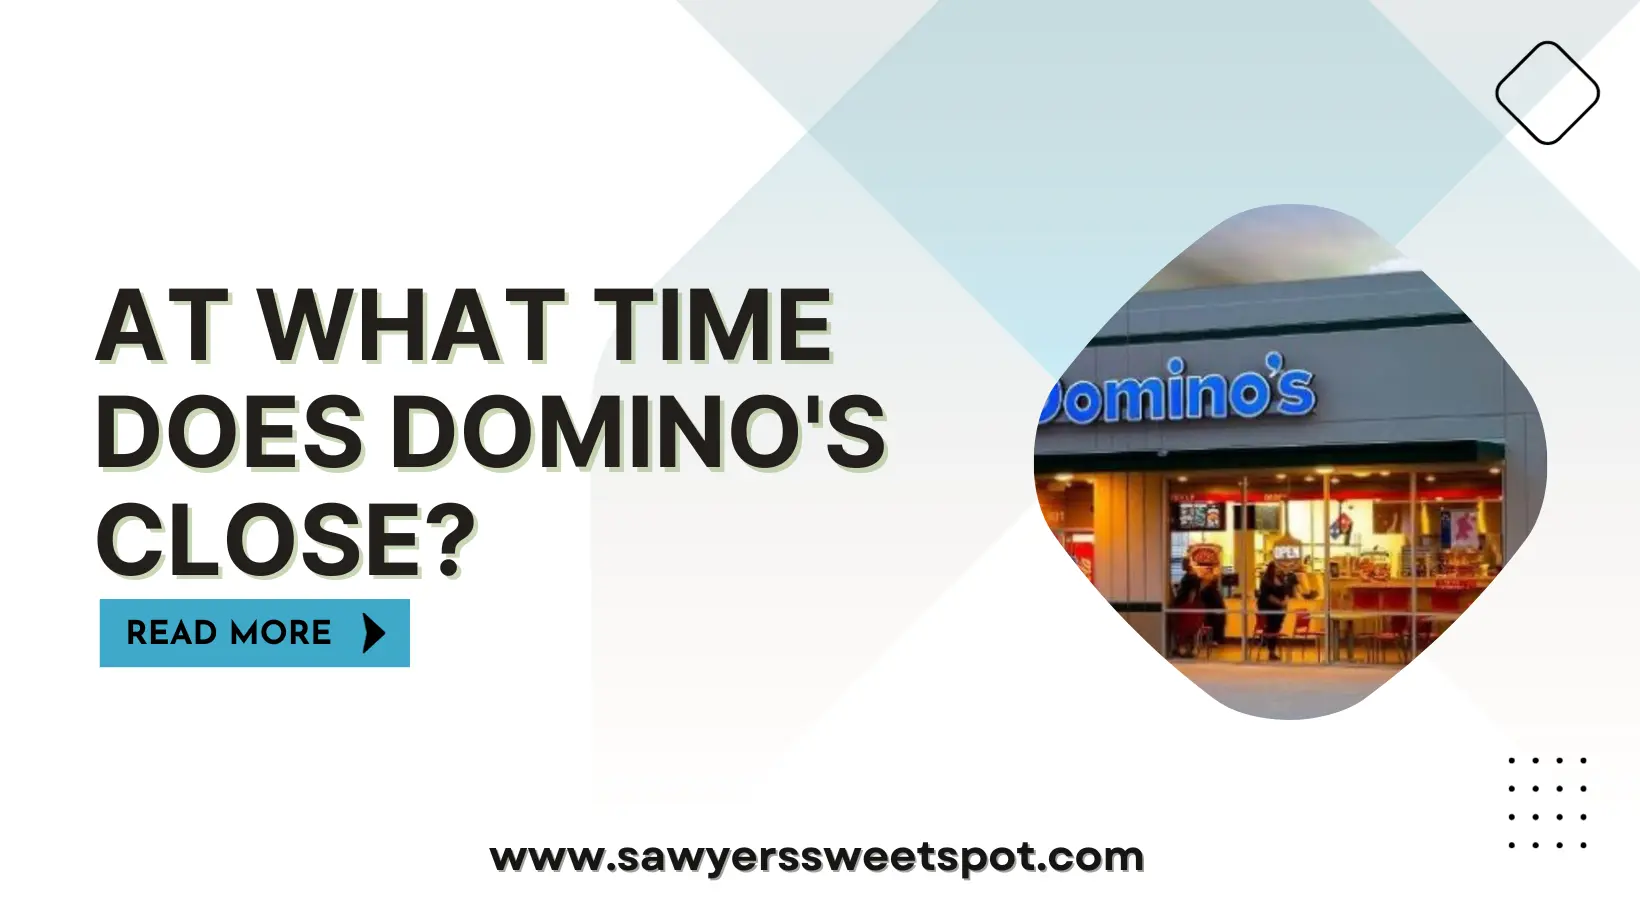 At What Time Does Domino's Close?